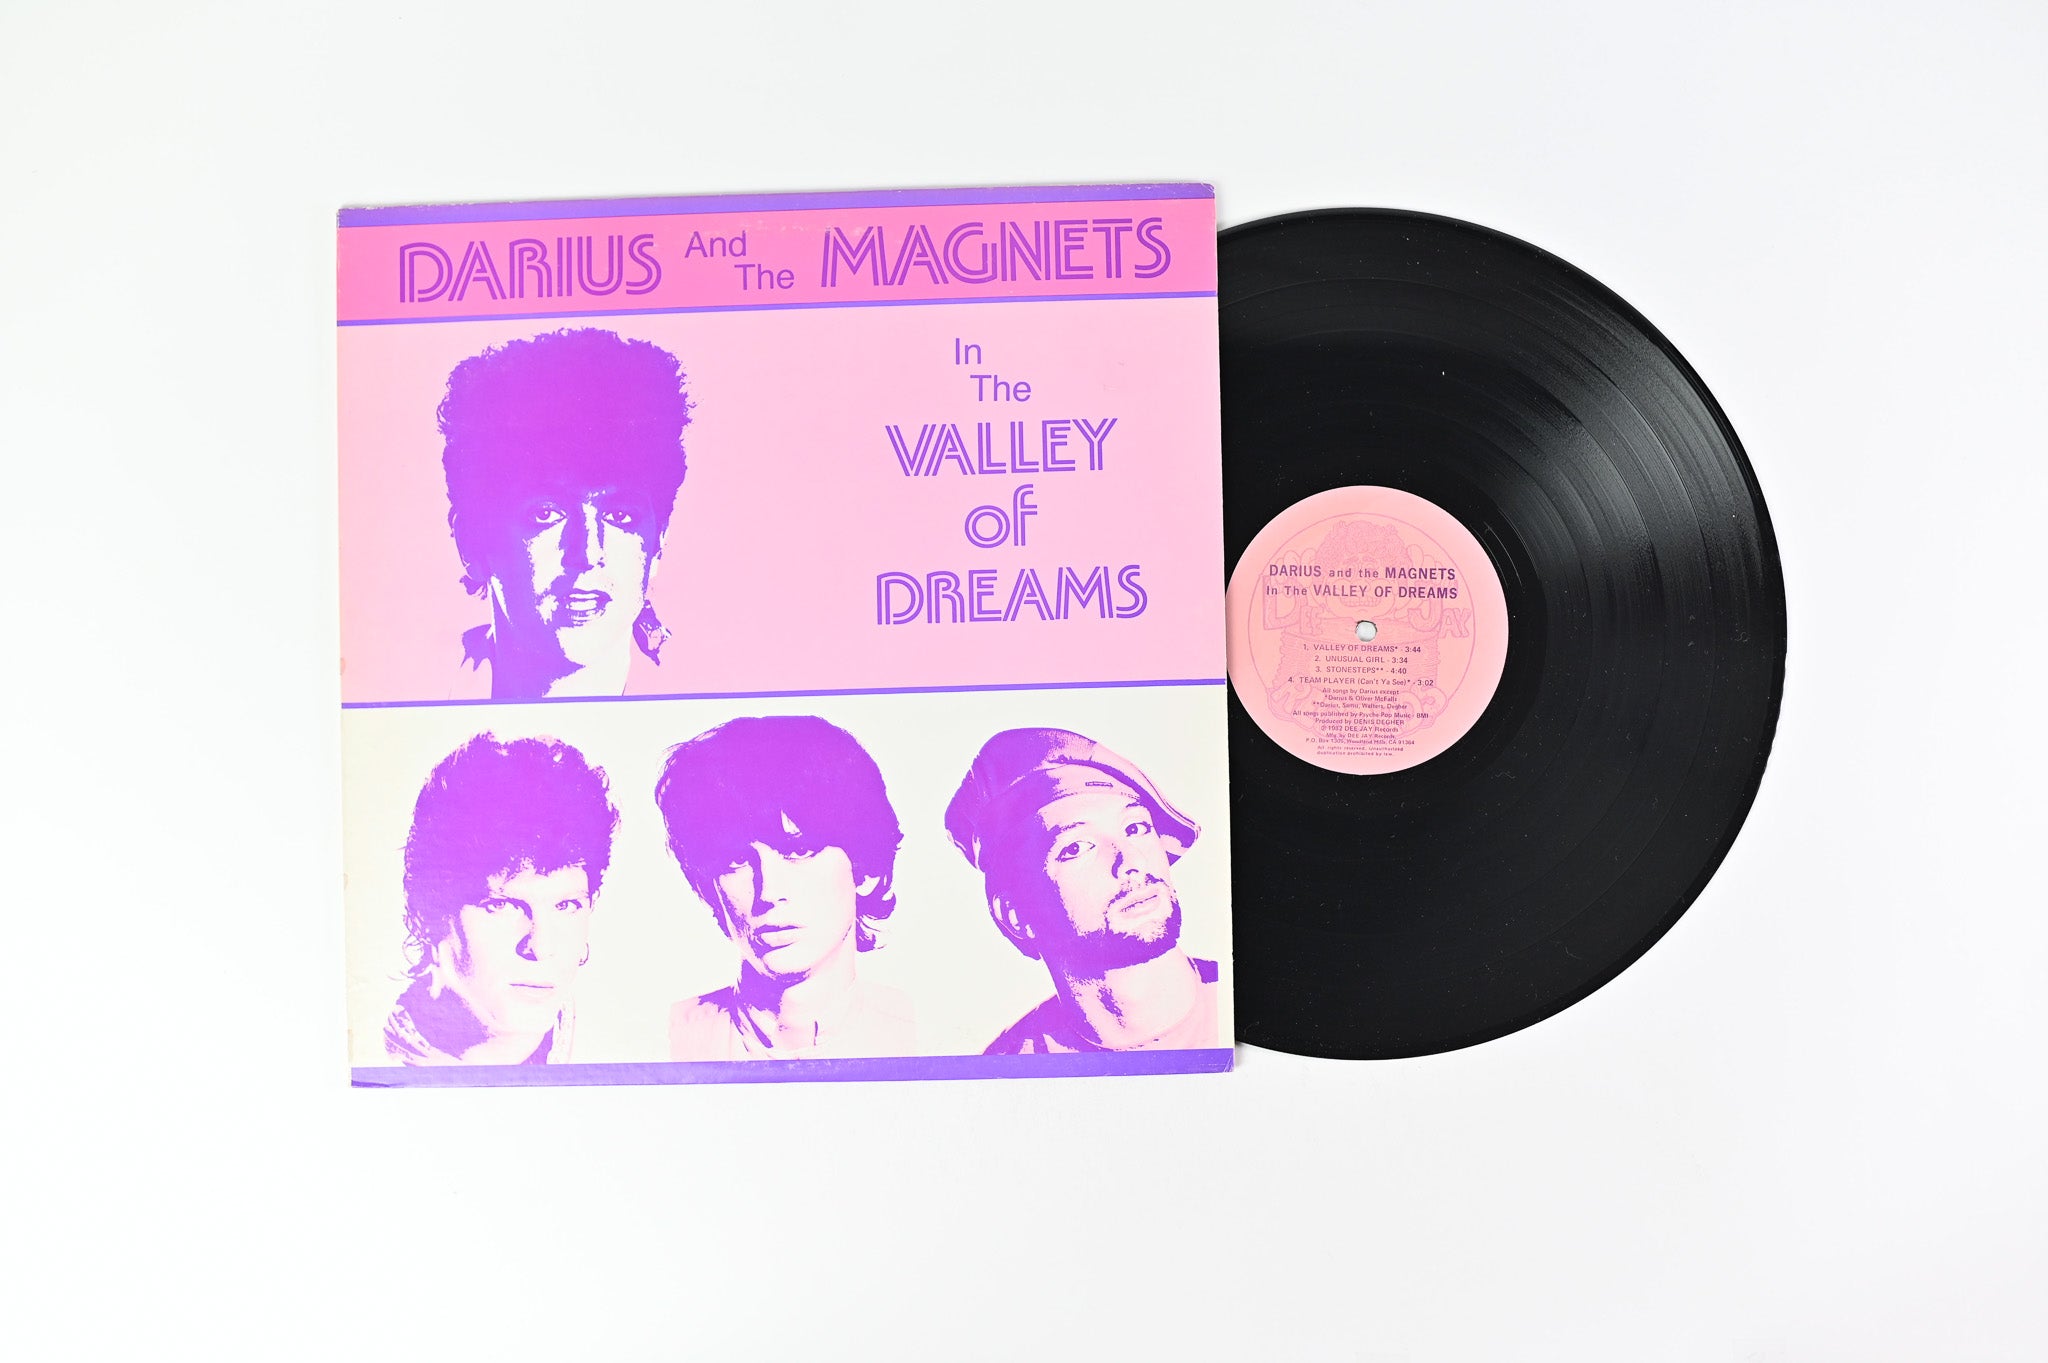 Darius And The Magnets - In The Valley Of Dreams on Dee Jay